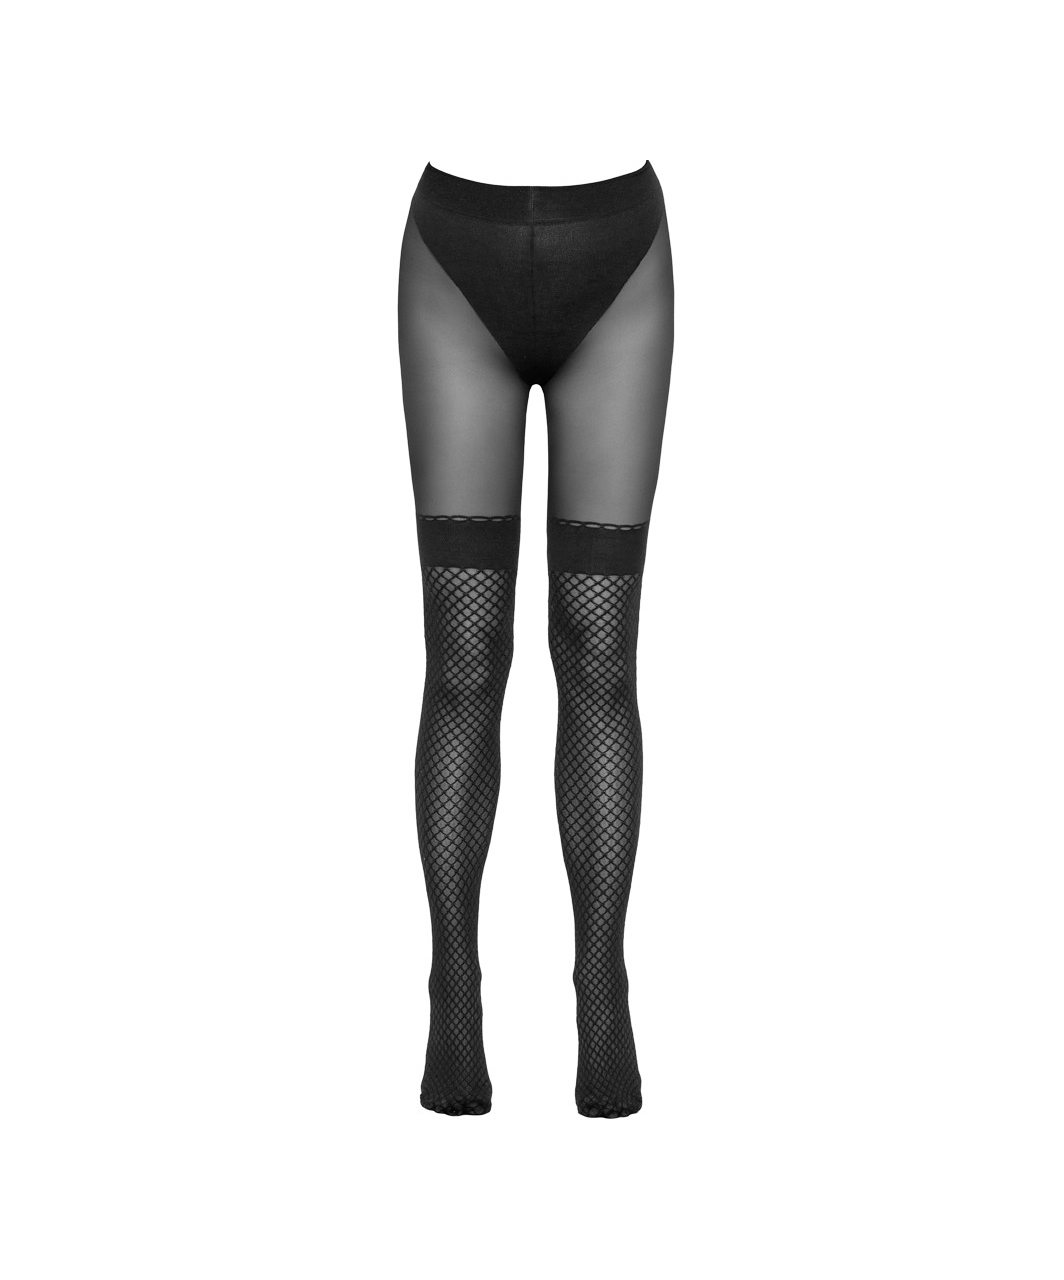 Cottelli Lingerie black crotchless tights